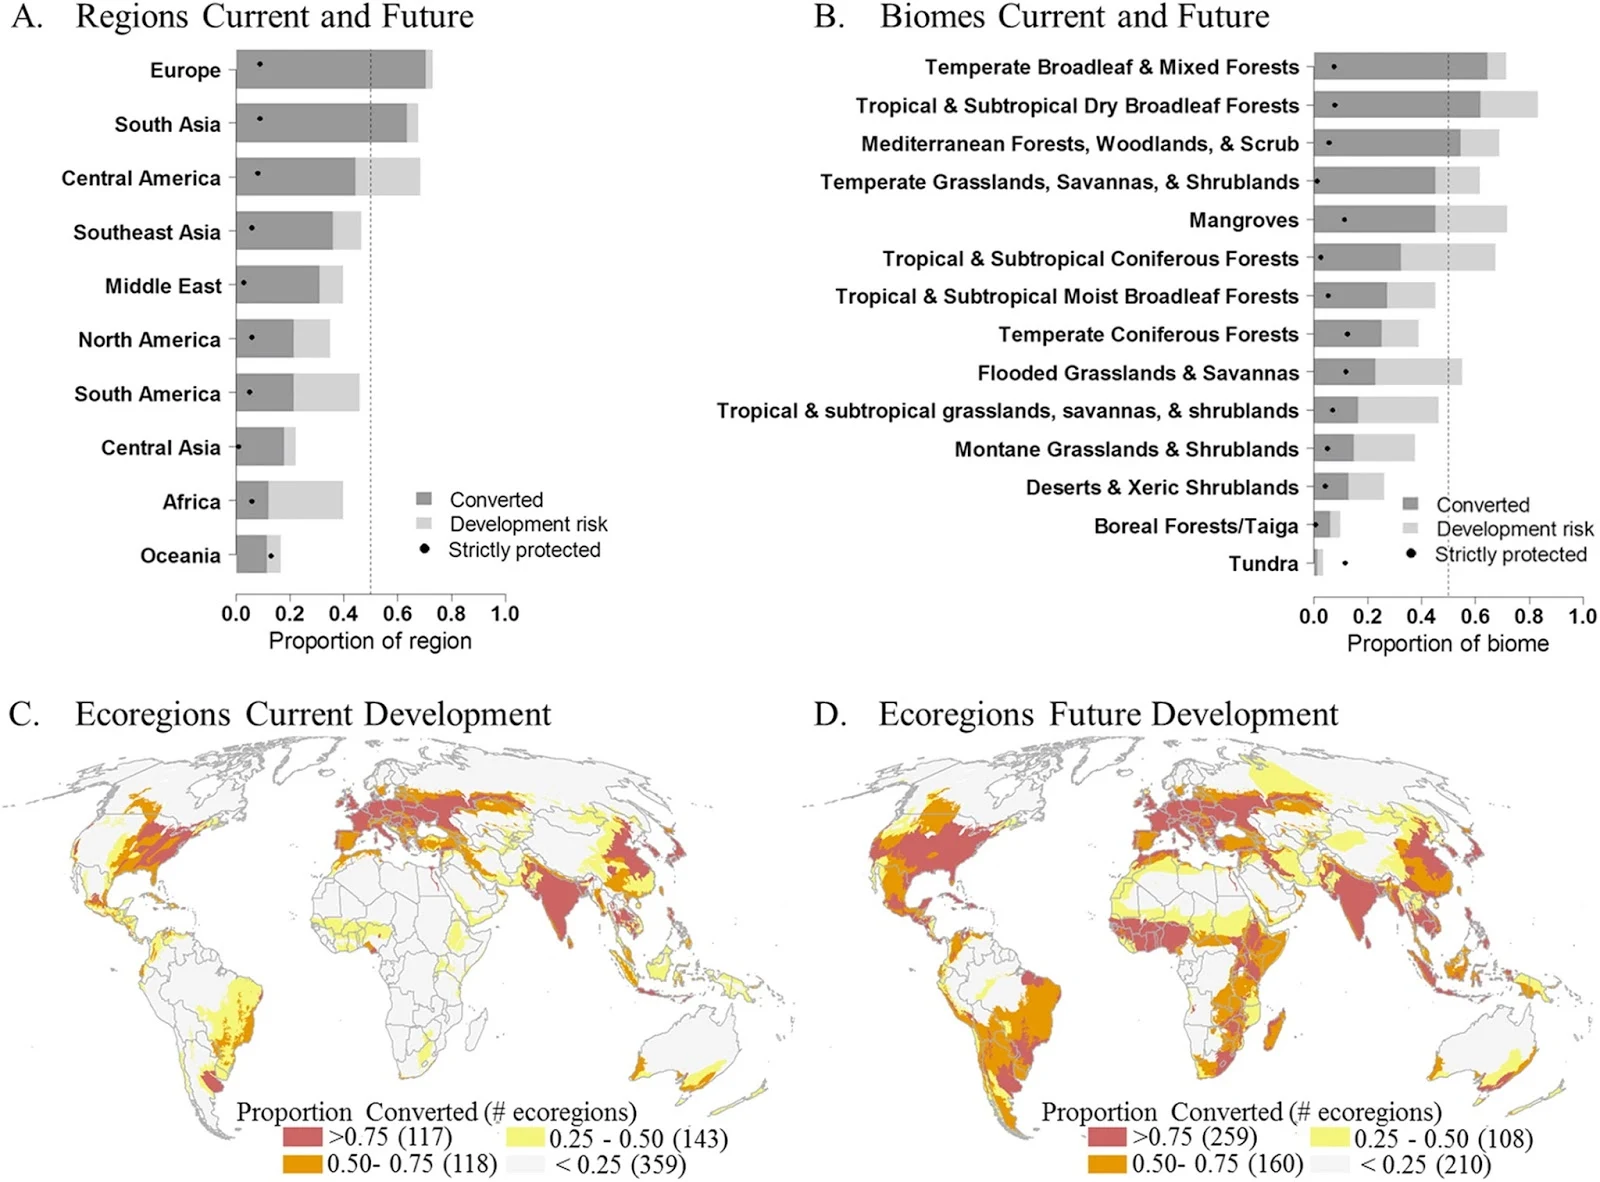 A World at Risk: Aggregating Development Trends to Forecast Global Habitat Conversion